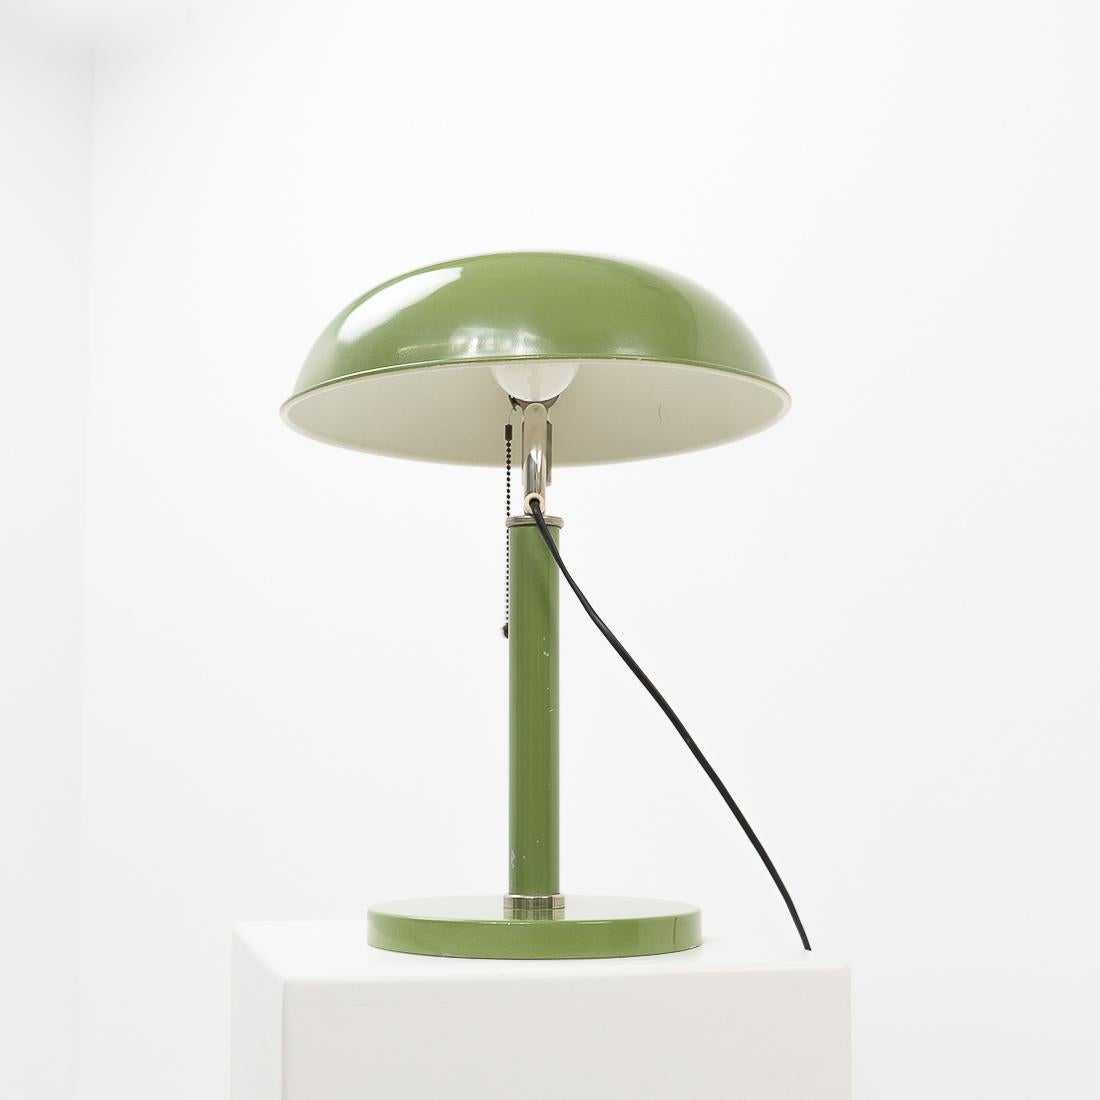 Mid-20th Century “1500” Table Lamp by Alfred Müller for Belmag AG, Switzerland, 1950s For Sale